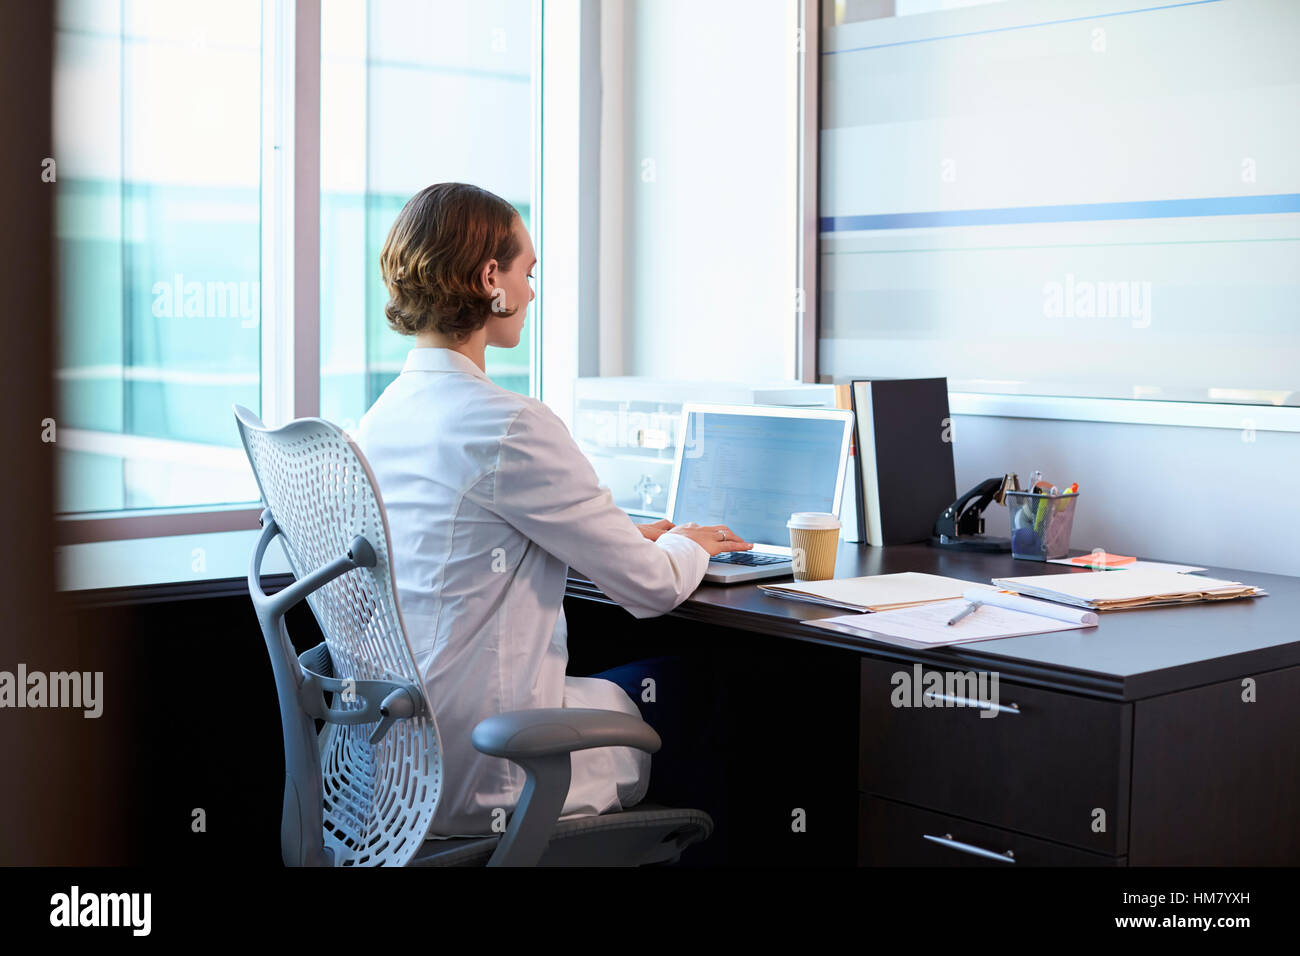 Female Doctor Wearing White Coat In Office Working At Desk Stock Photo